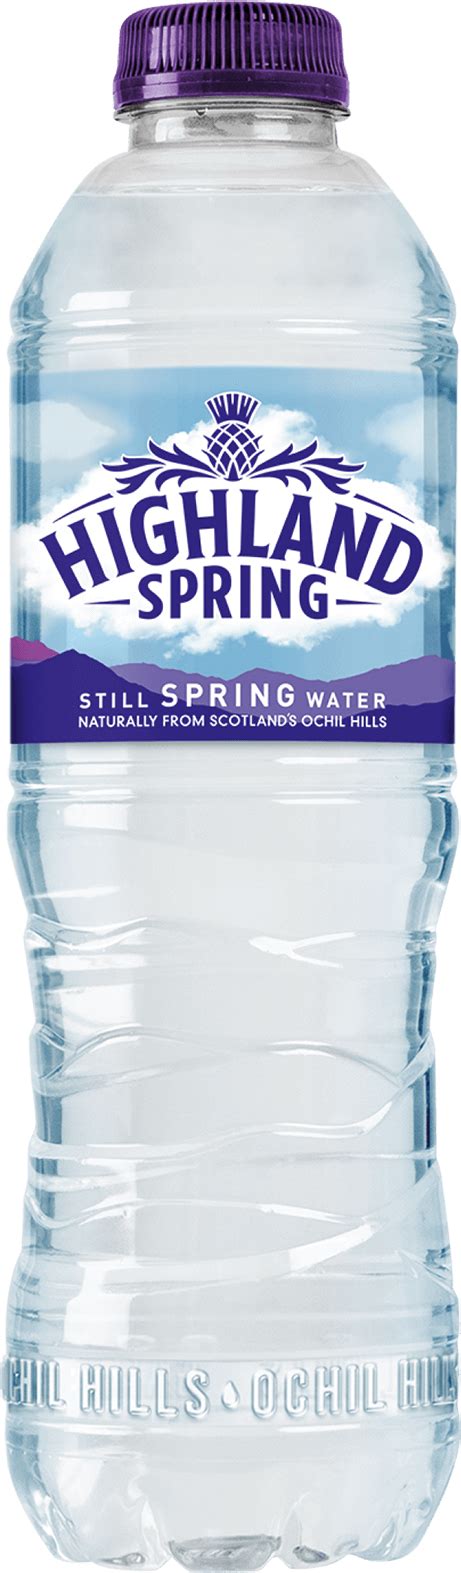 Highland Spring Products